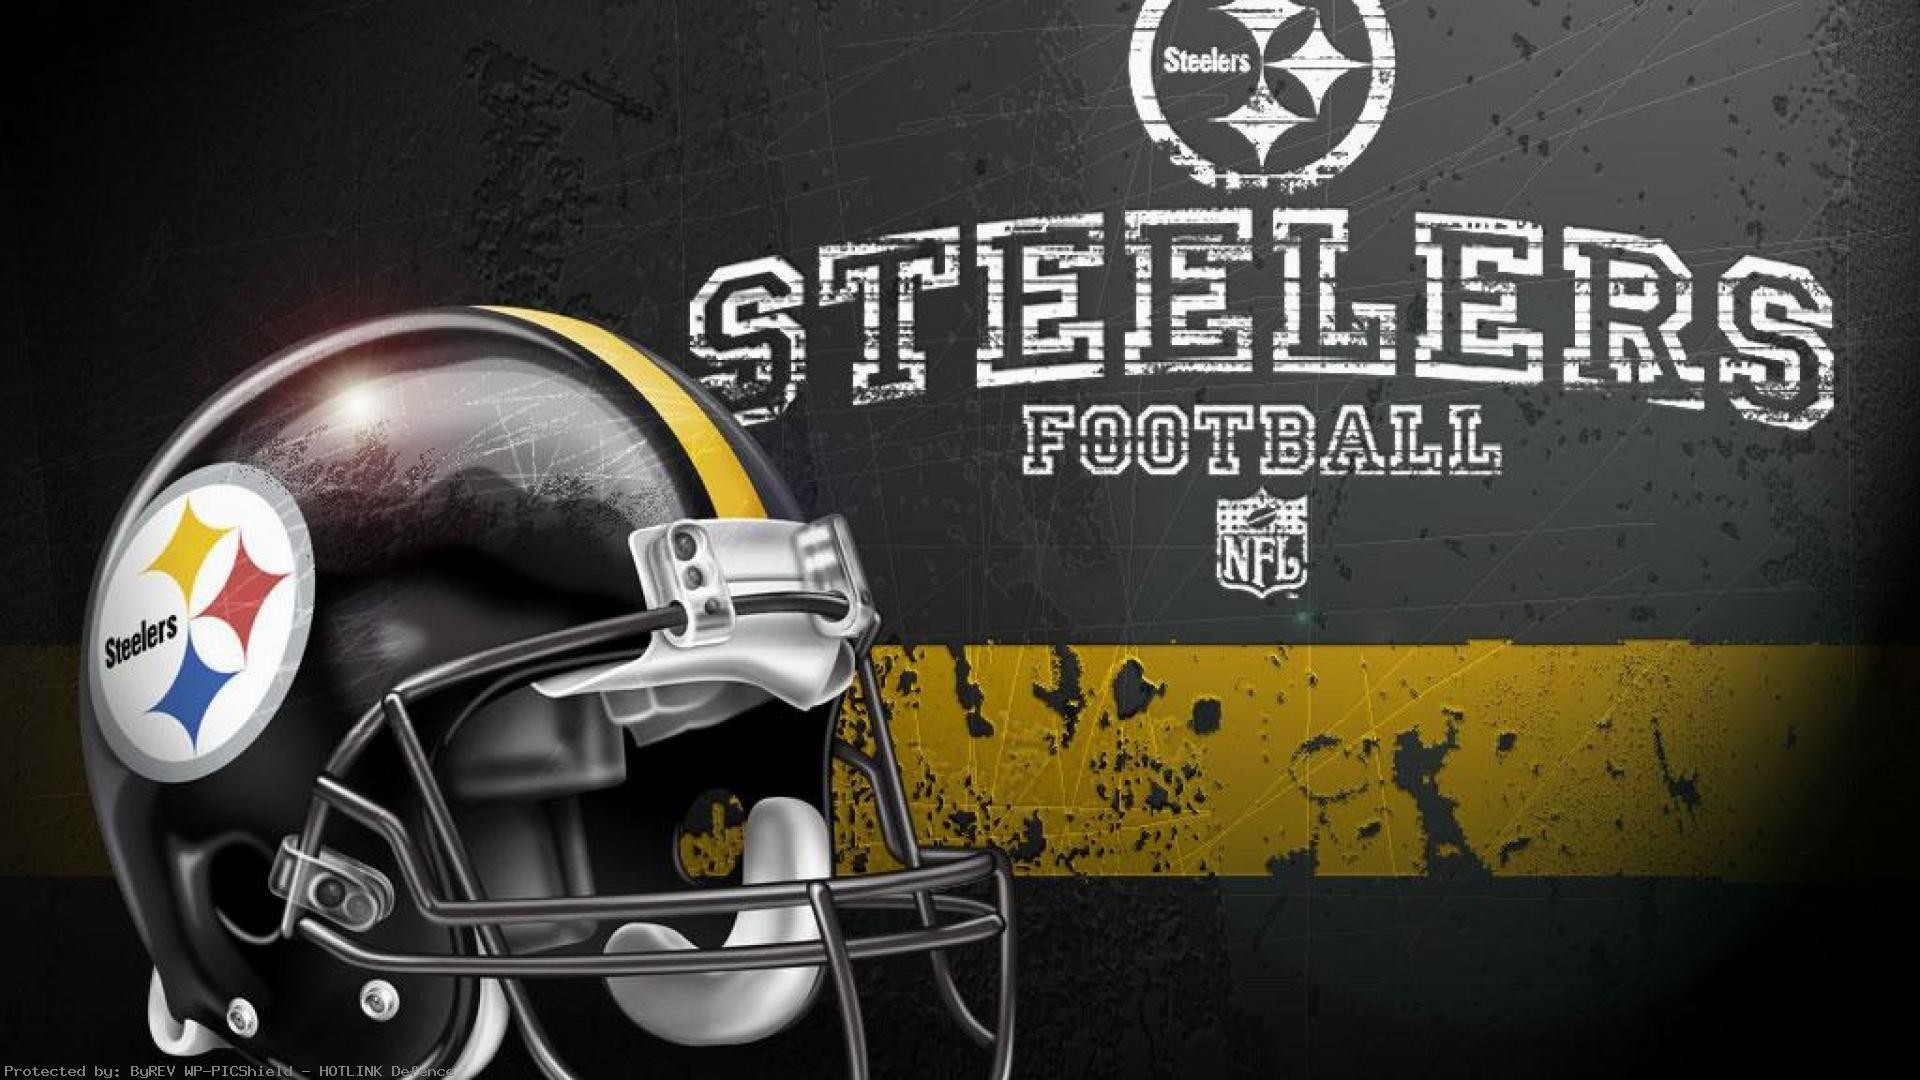 1920x1080 1920-x-1080px-steelers-desktop-backgrounds-by-Caldwell-